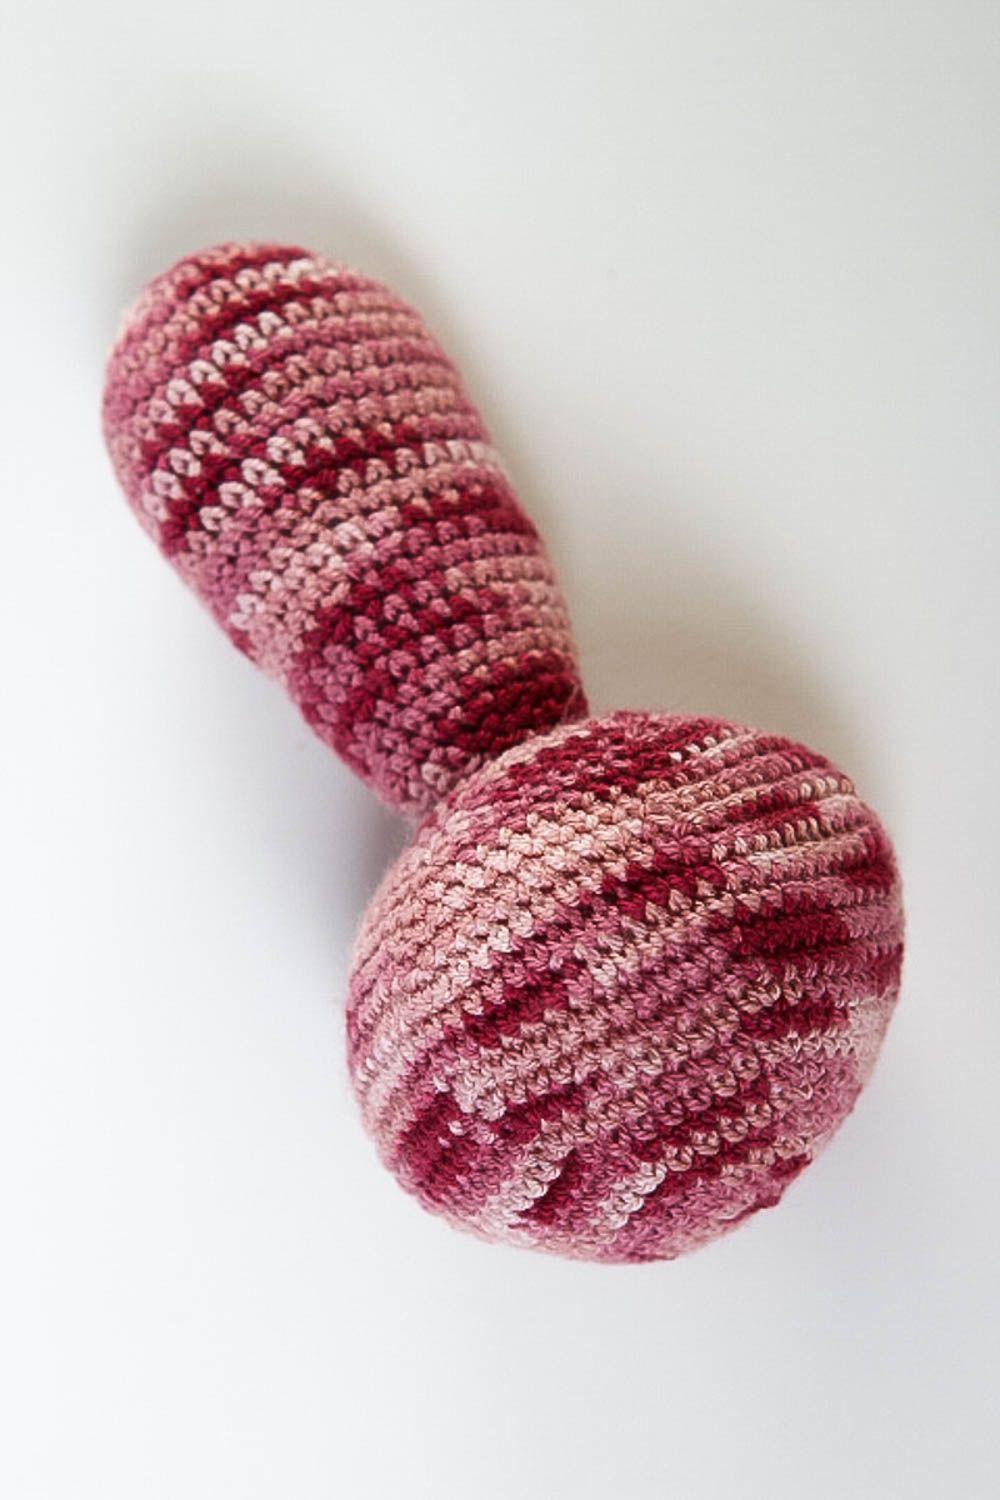 Handmade rattle toy present for new born baby crocheted toy for babies photo 2